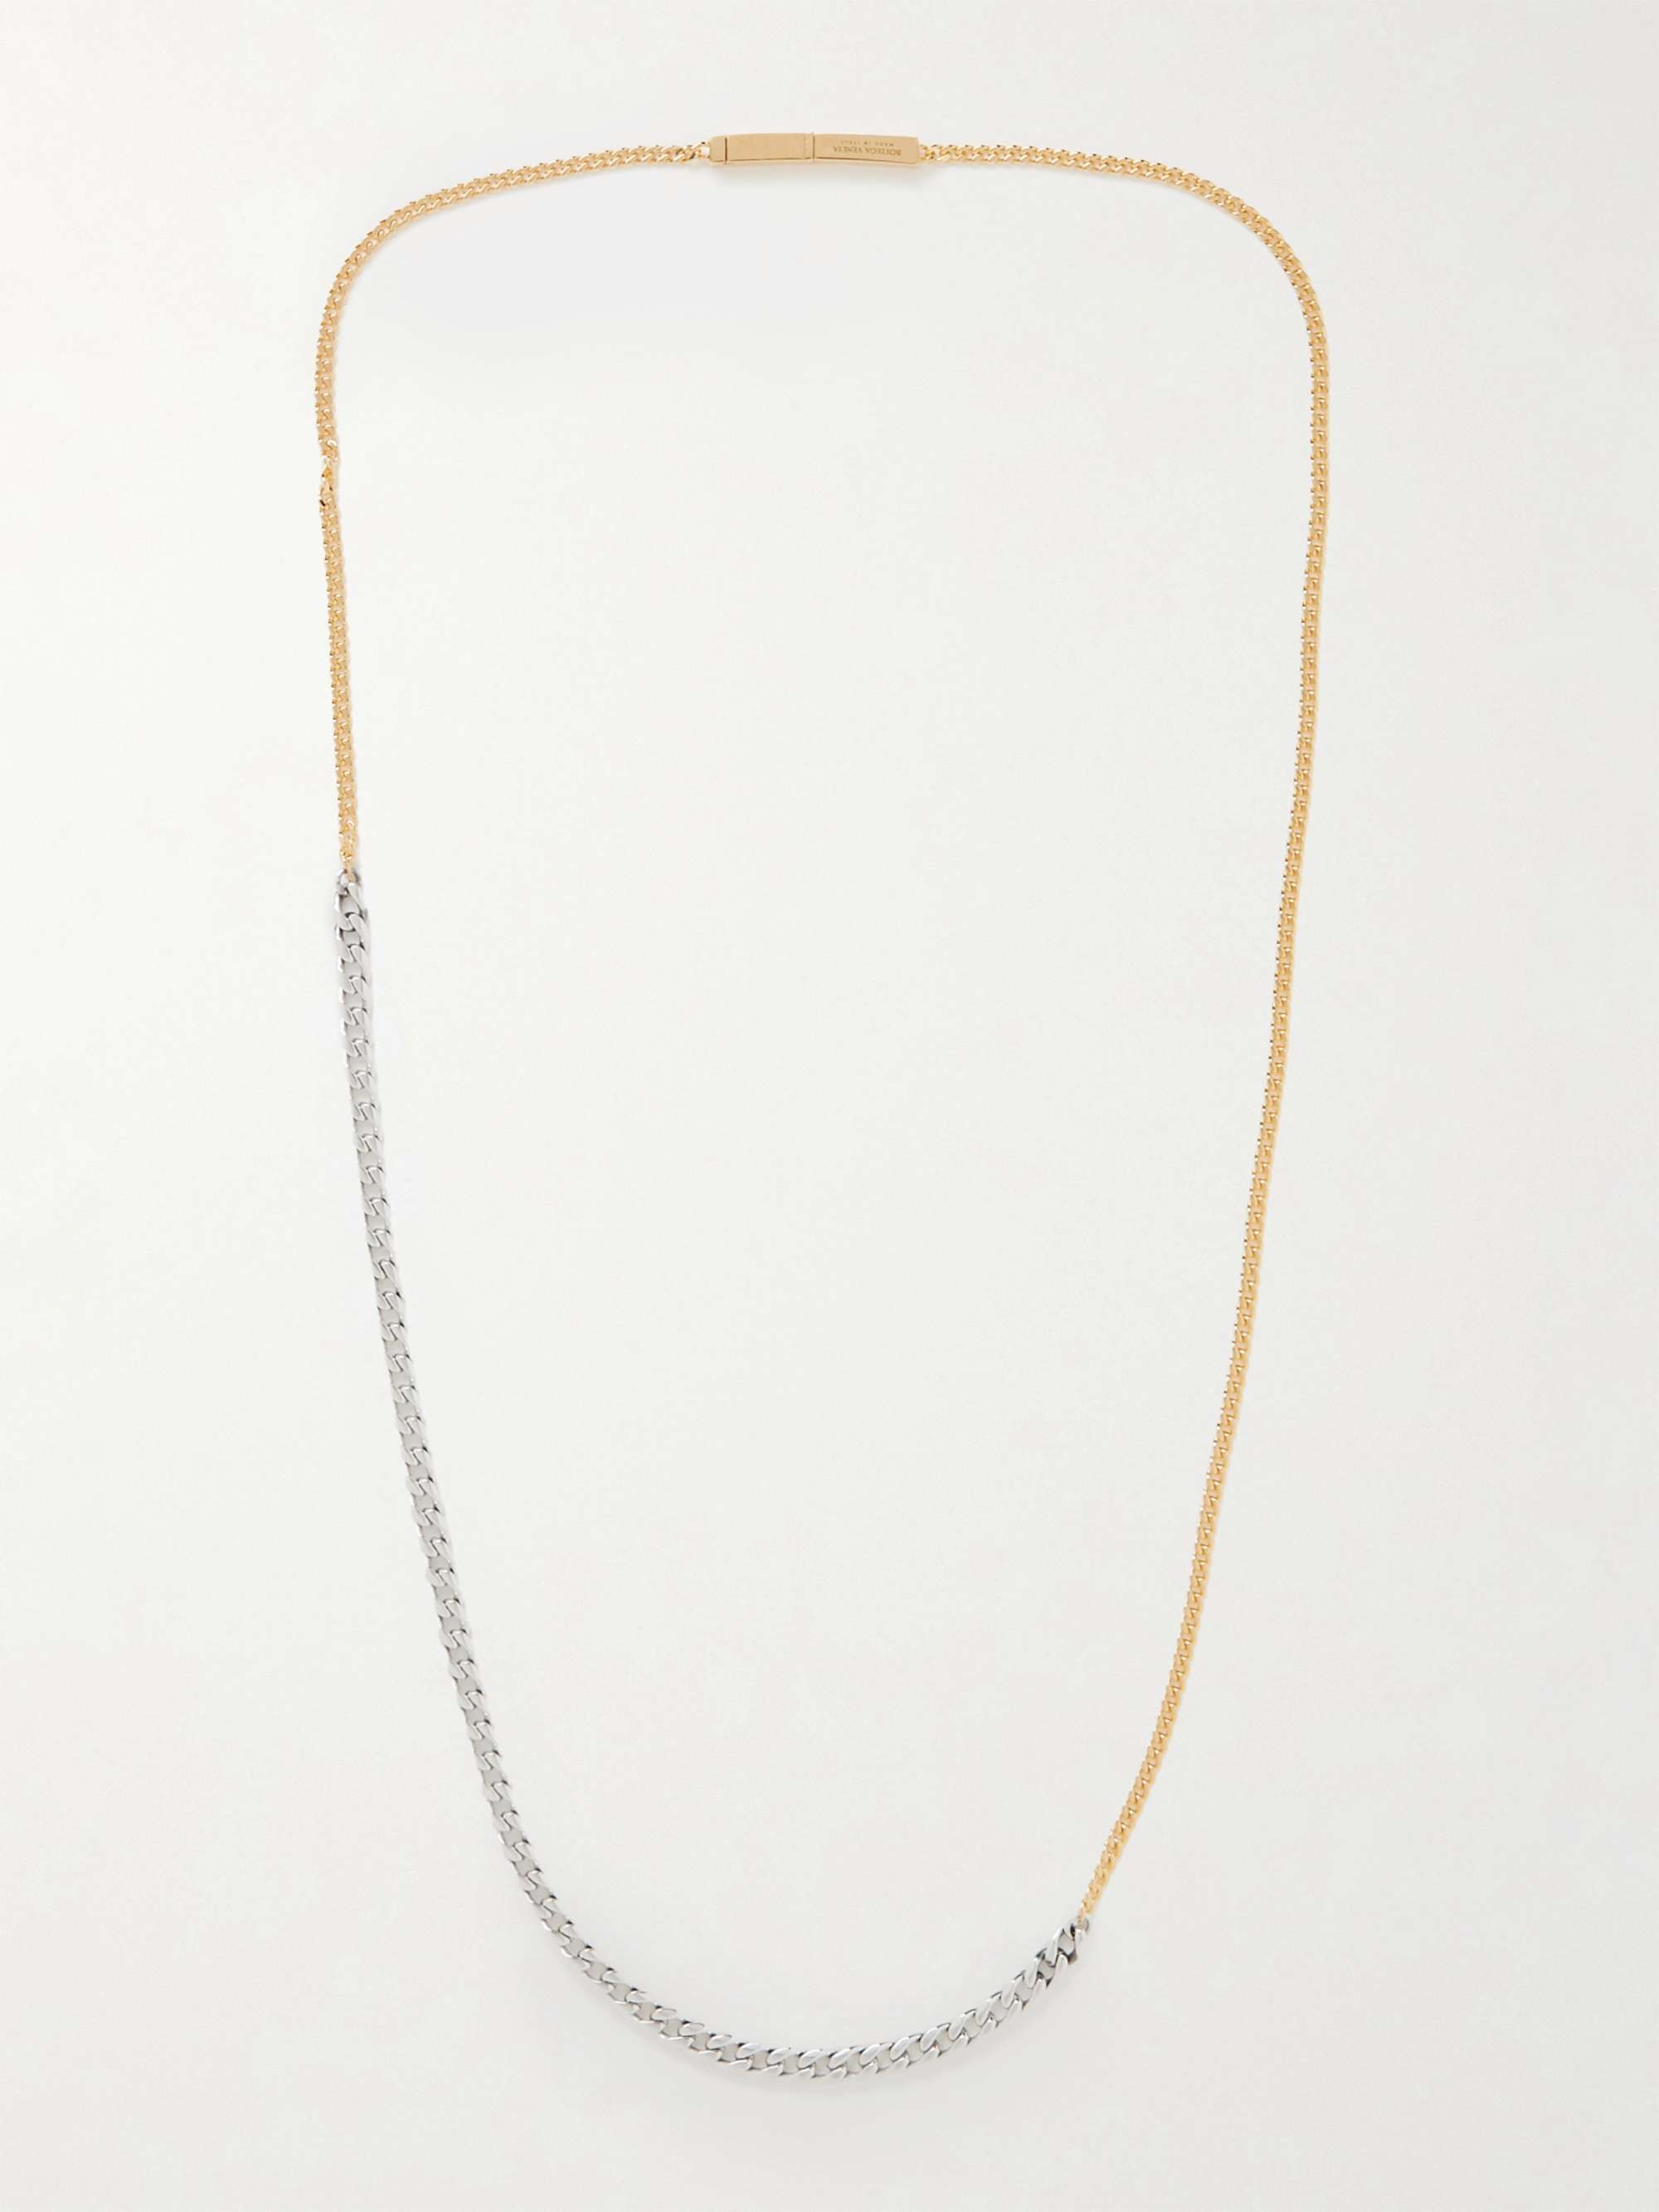 Gold Vermeil and Sterling Silver Necklace | MR PORTER